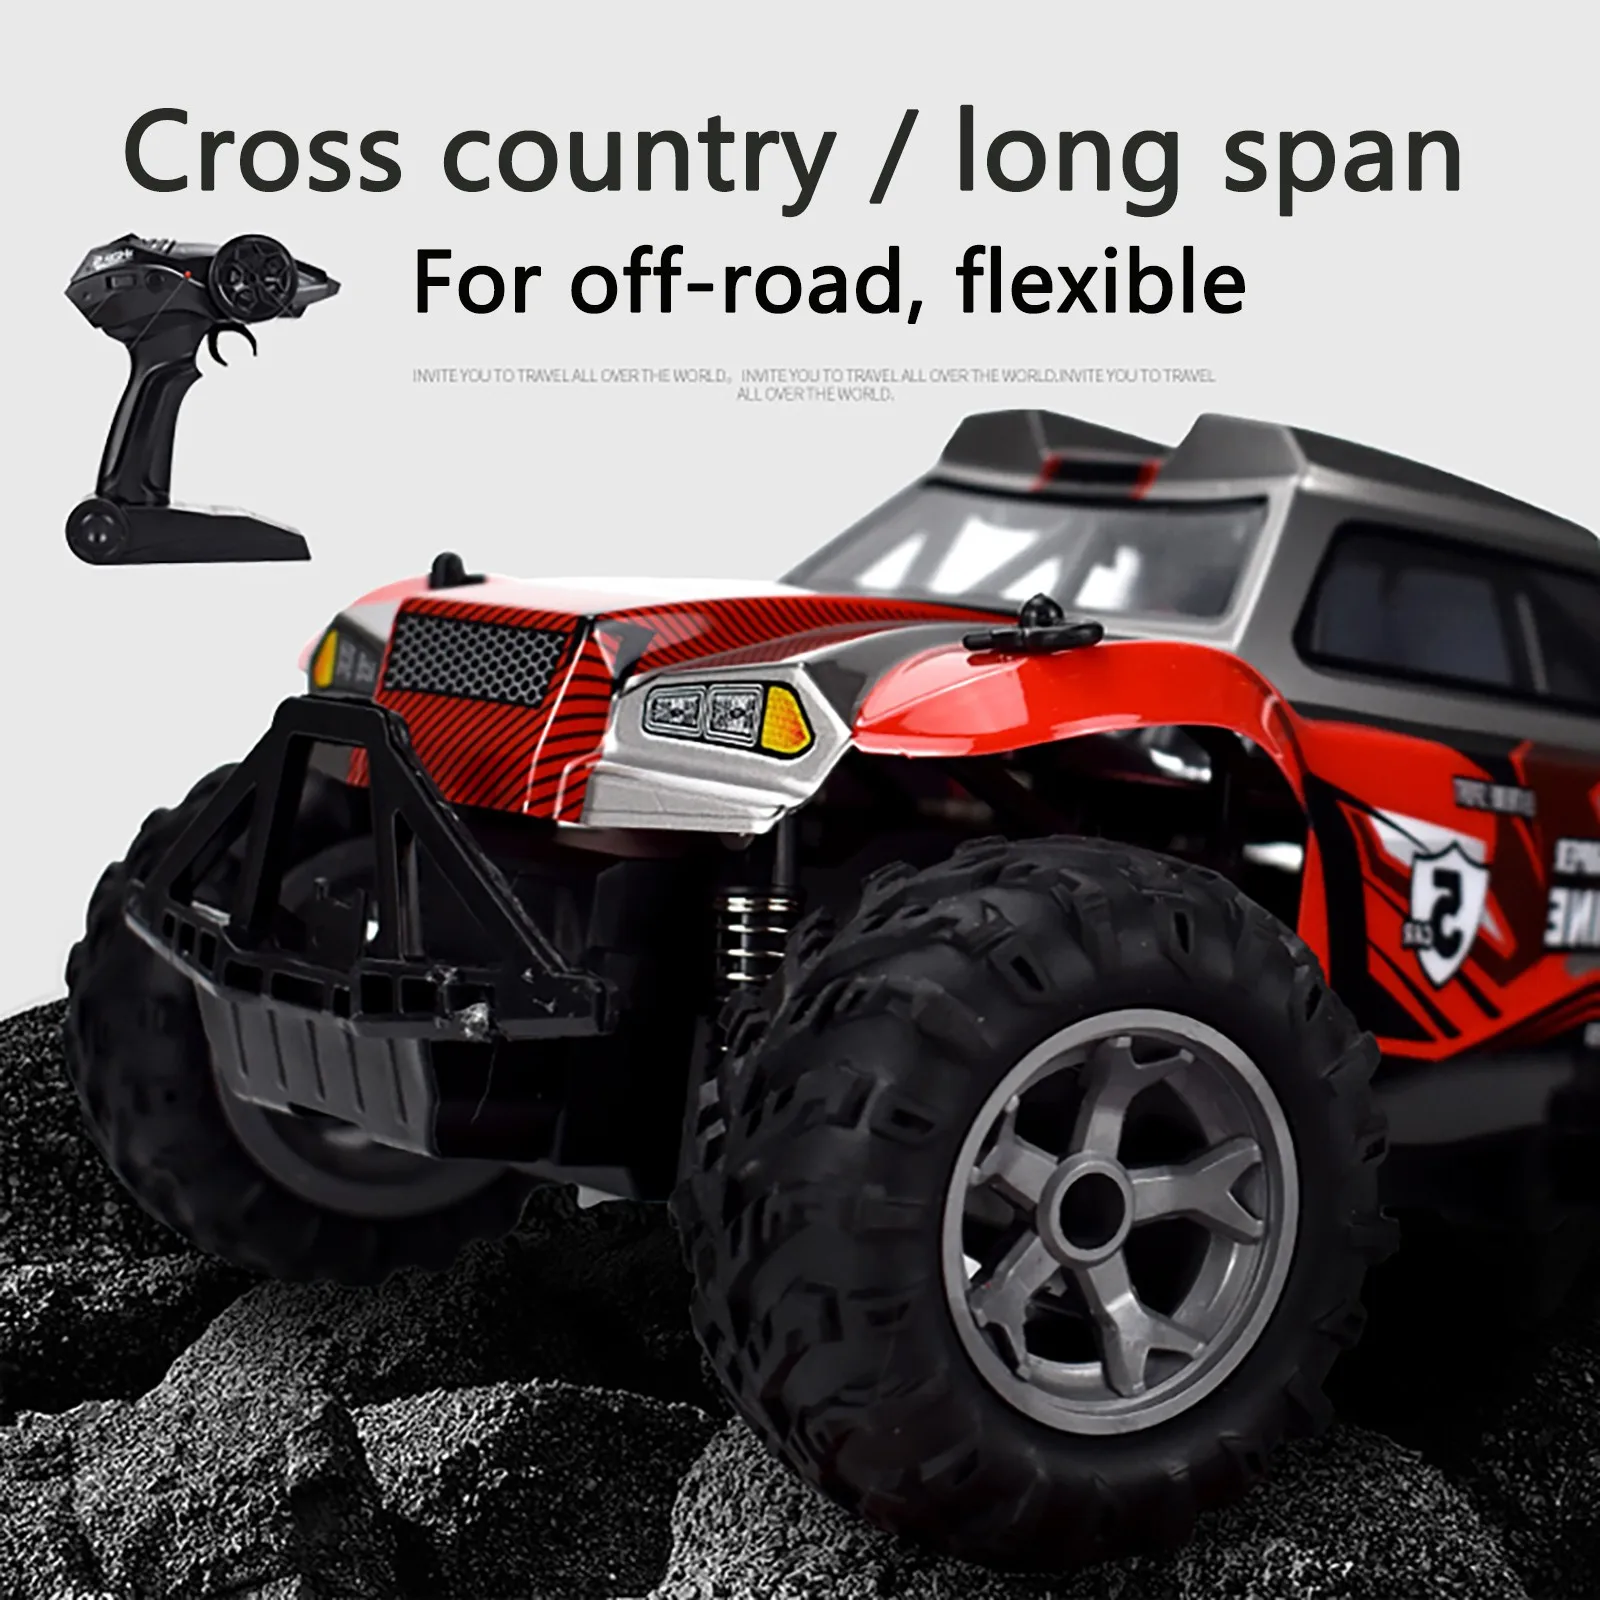 

Rc Car 4ch Bigfoot Car High Speed Racing Car Remote Control Car Model Off-road Vehicle Electronic Monster Truck Children‘s Toys